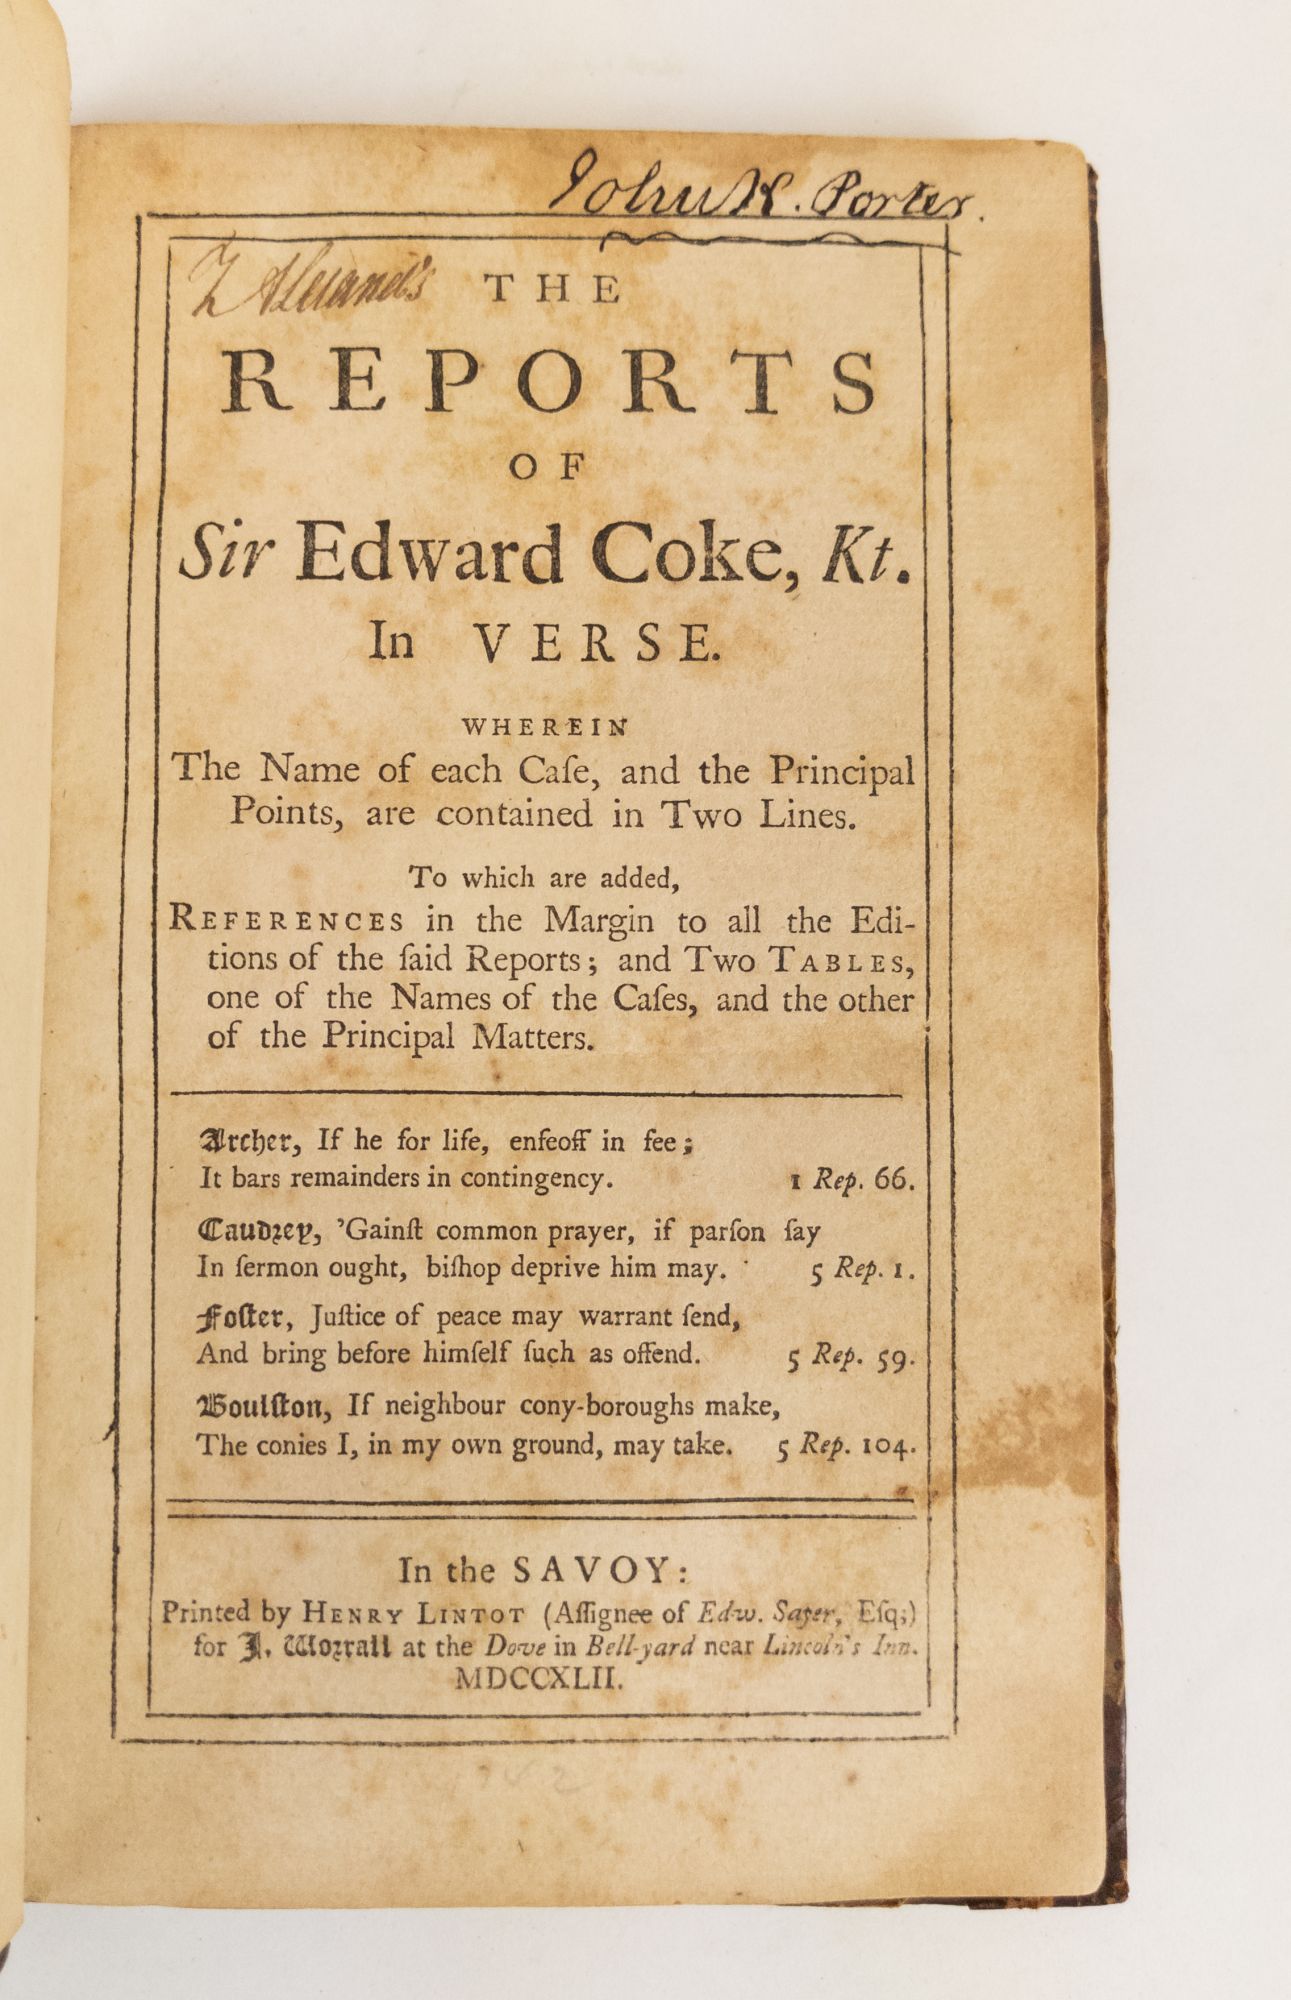 Product Image for The Reports of Sir Edward Coke, Kt. In Verse